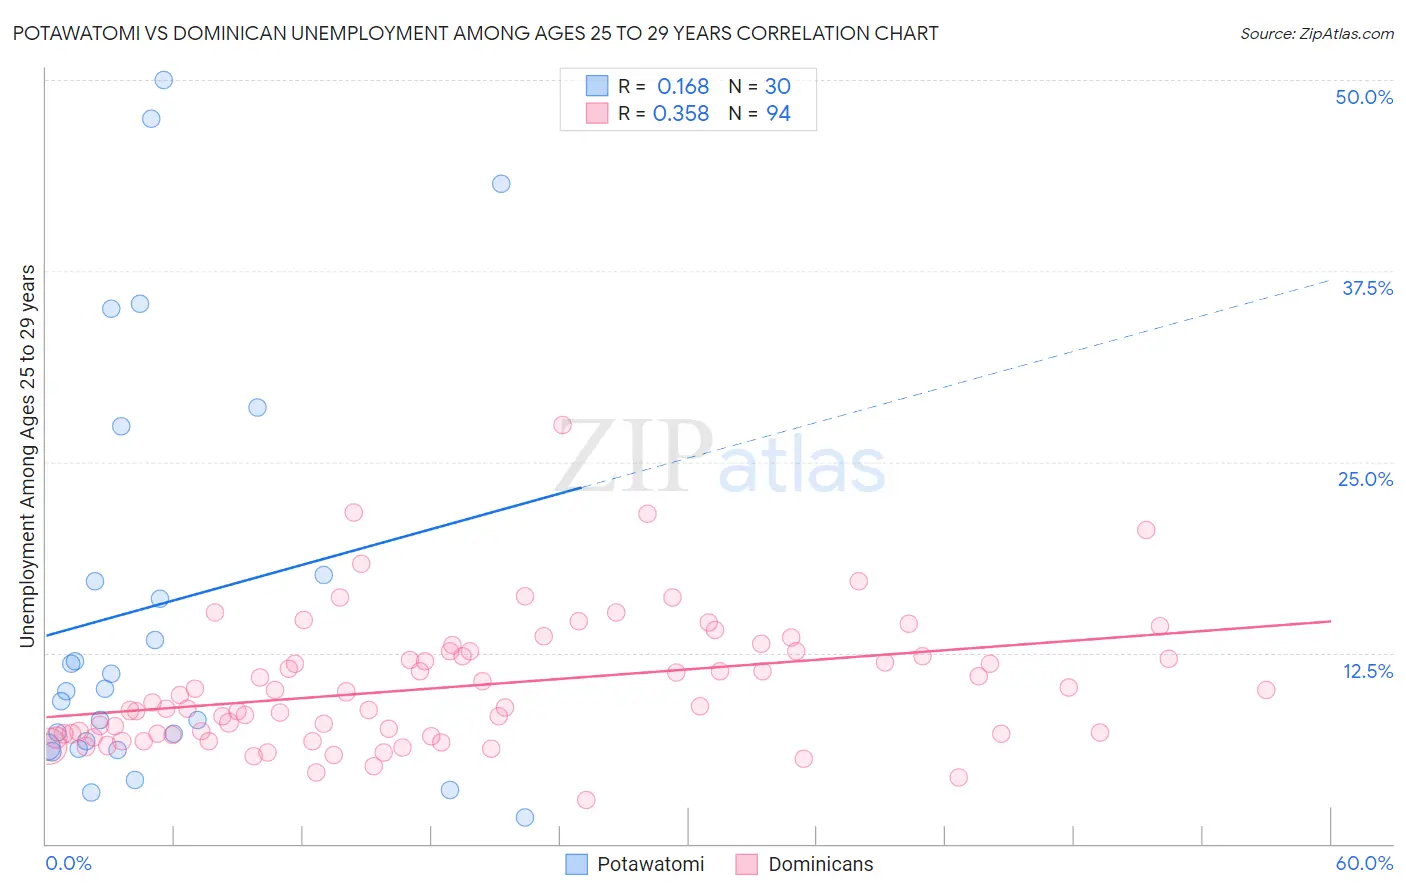 Potawatomi vs Dominican Unemployment Among Ages 25 to 29 years